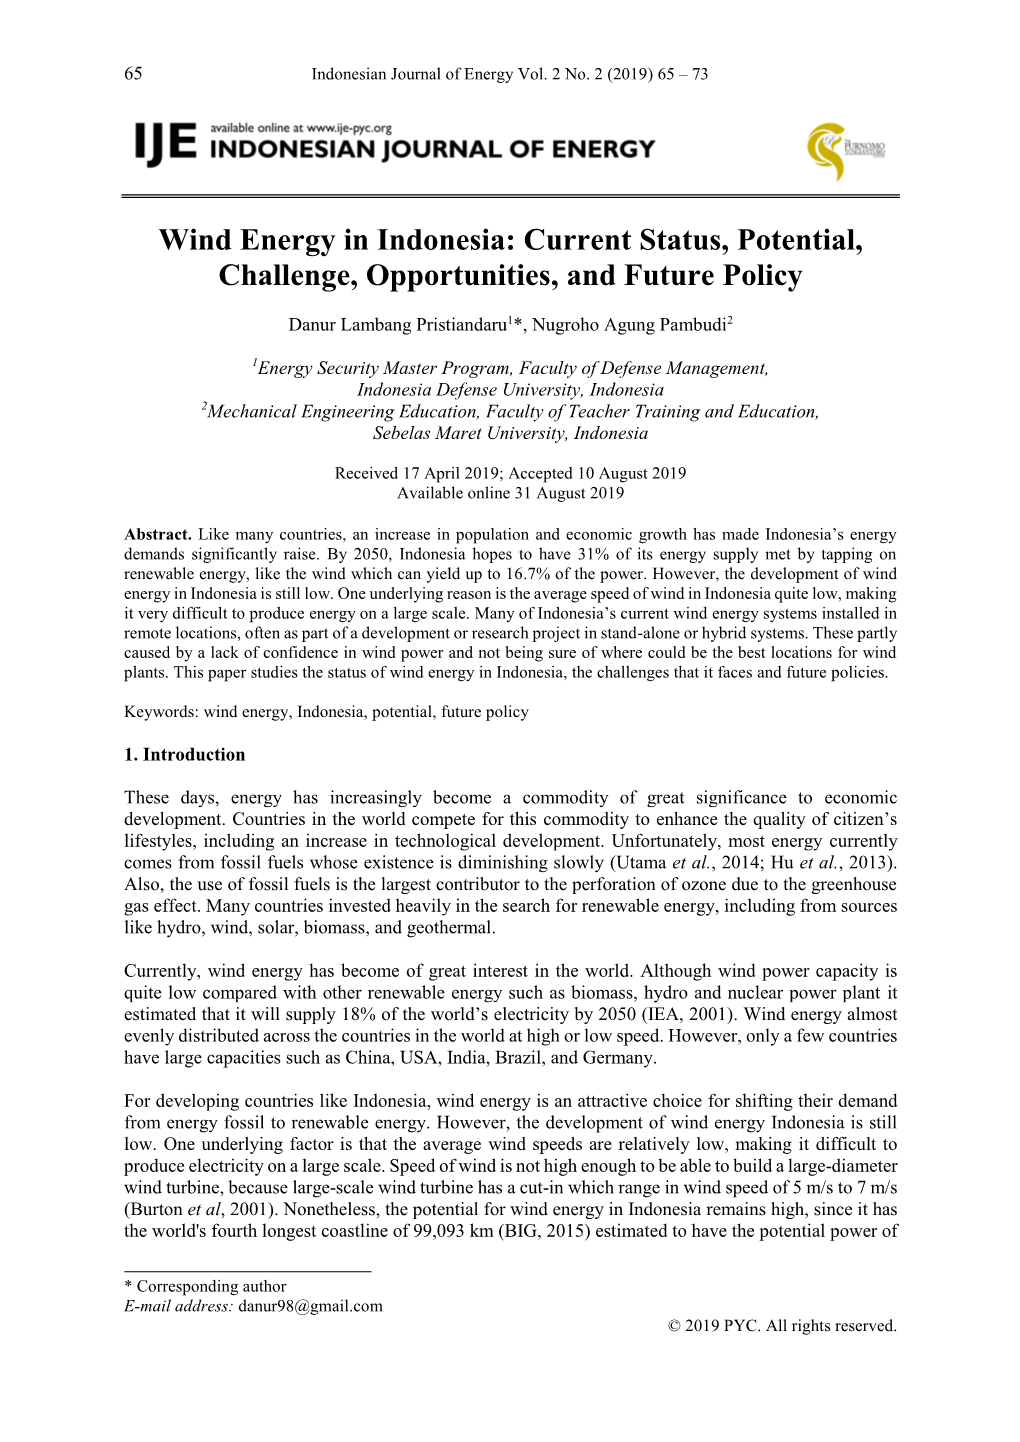 Wind Energy in Indonesia: Current Status, Potential, Challenge, Opportunities, and Future Policy